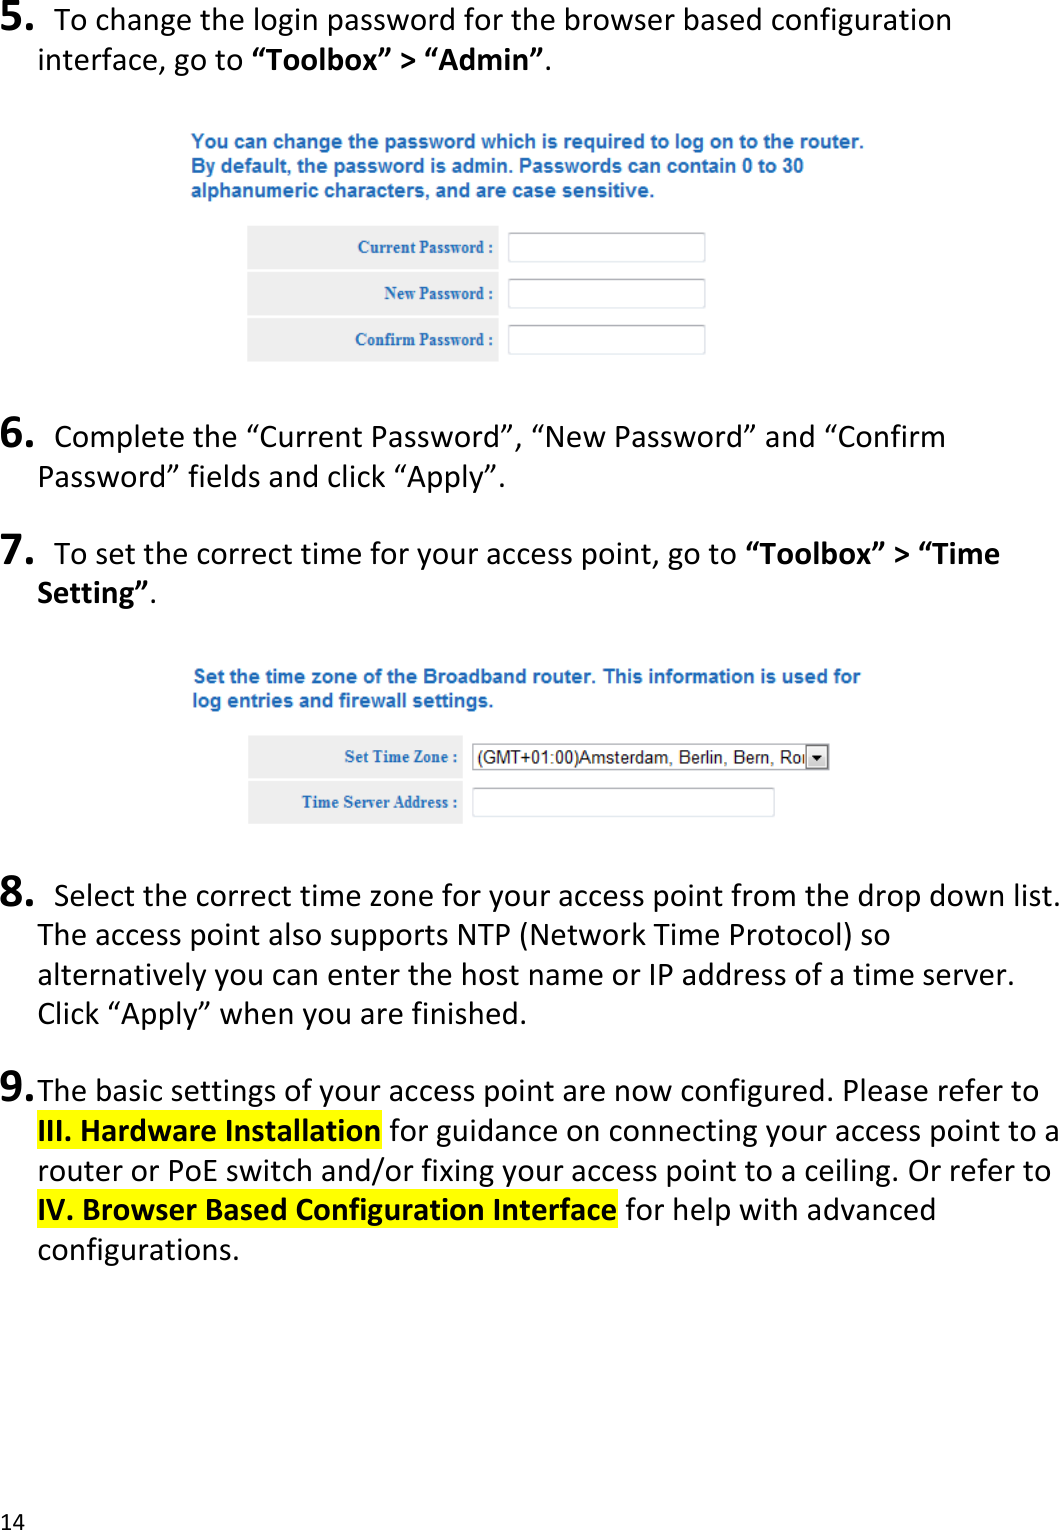 14   5.   To change the login password for the browser based configuration interface, go to “Toolbox” &gt; “Admin”.    6.  Complete the “Current Password”, “New Password” and “Confirm Password” fields and click “Apply”.  7.   To set the correct time for your access point, go to “Toolbox” &gt; “Time Setting”.    8.   Select the correct time zone for your access point from the drop down list. The access point also supports NTP (Network Time Protocol) so alternatively you can enter the host name or IP address of a time server. Click “Apply” when you are finished.  9. The basic settings of your access point are now configured. Please refer to III. Hardware Installation for guidance on connecting your access point to a router or PoE switch and/or fixing your access point to a ceiling. Or refer to IV. Browser Based Configuration Interface for help with advanced configurations.    